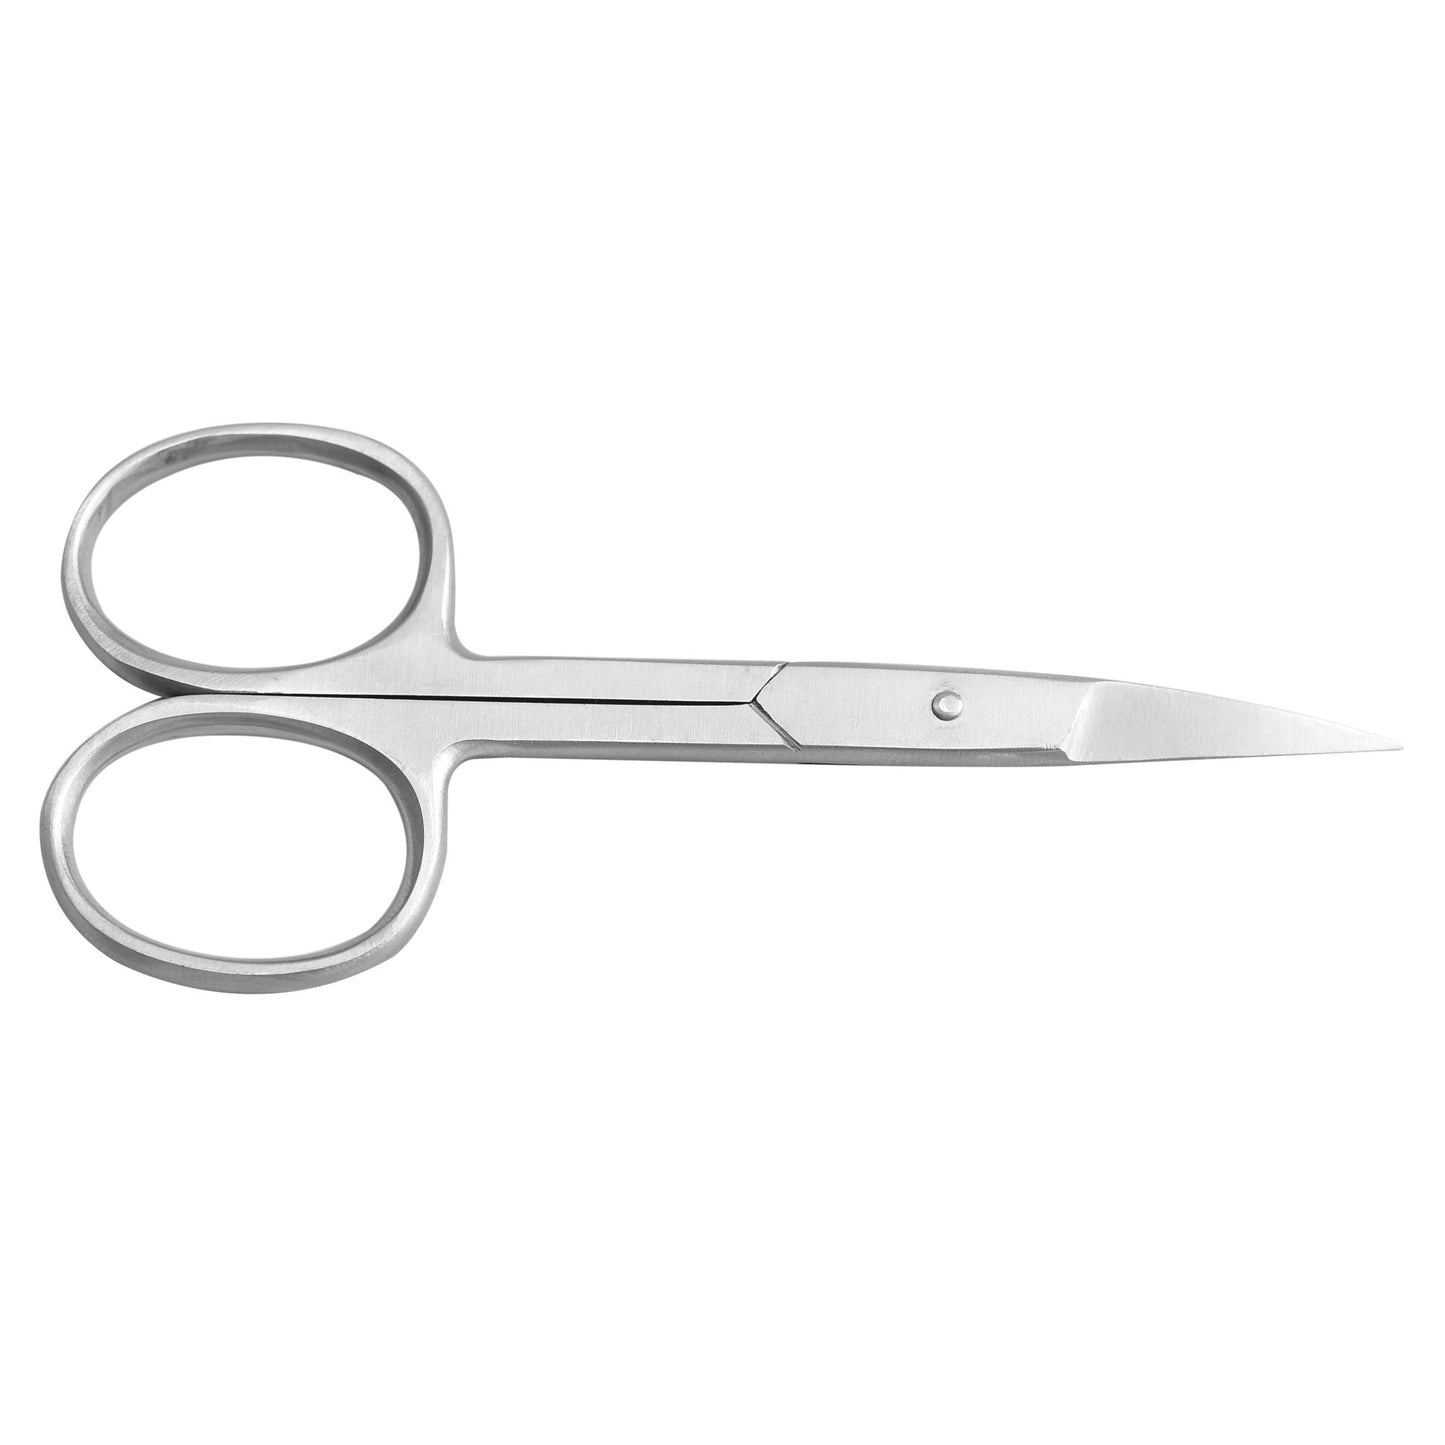 Nail scissors, curved, pointed - satin